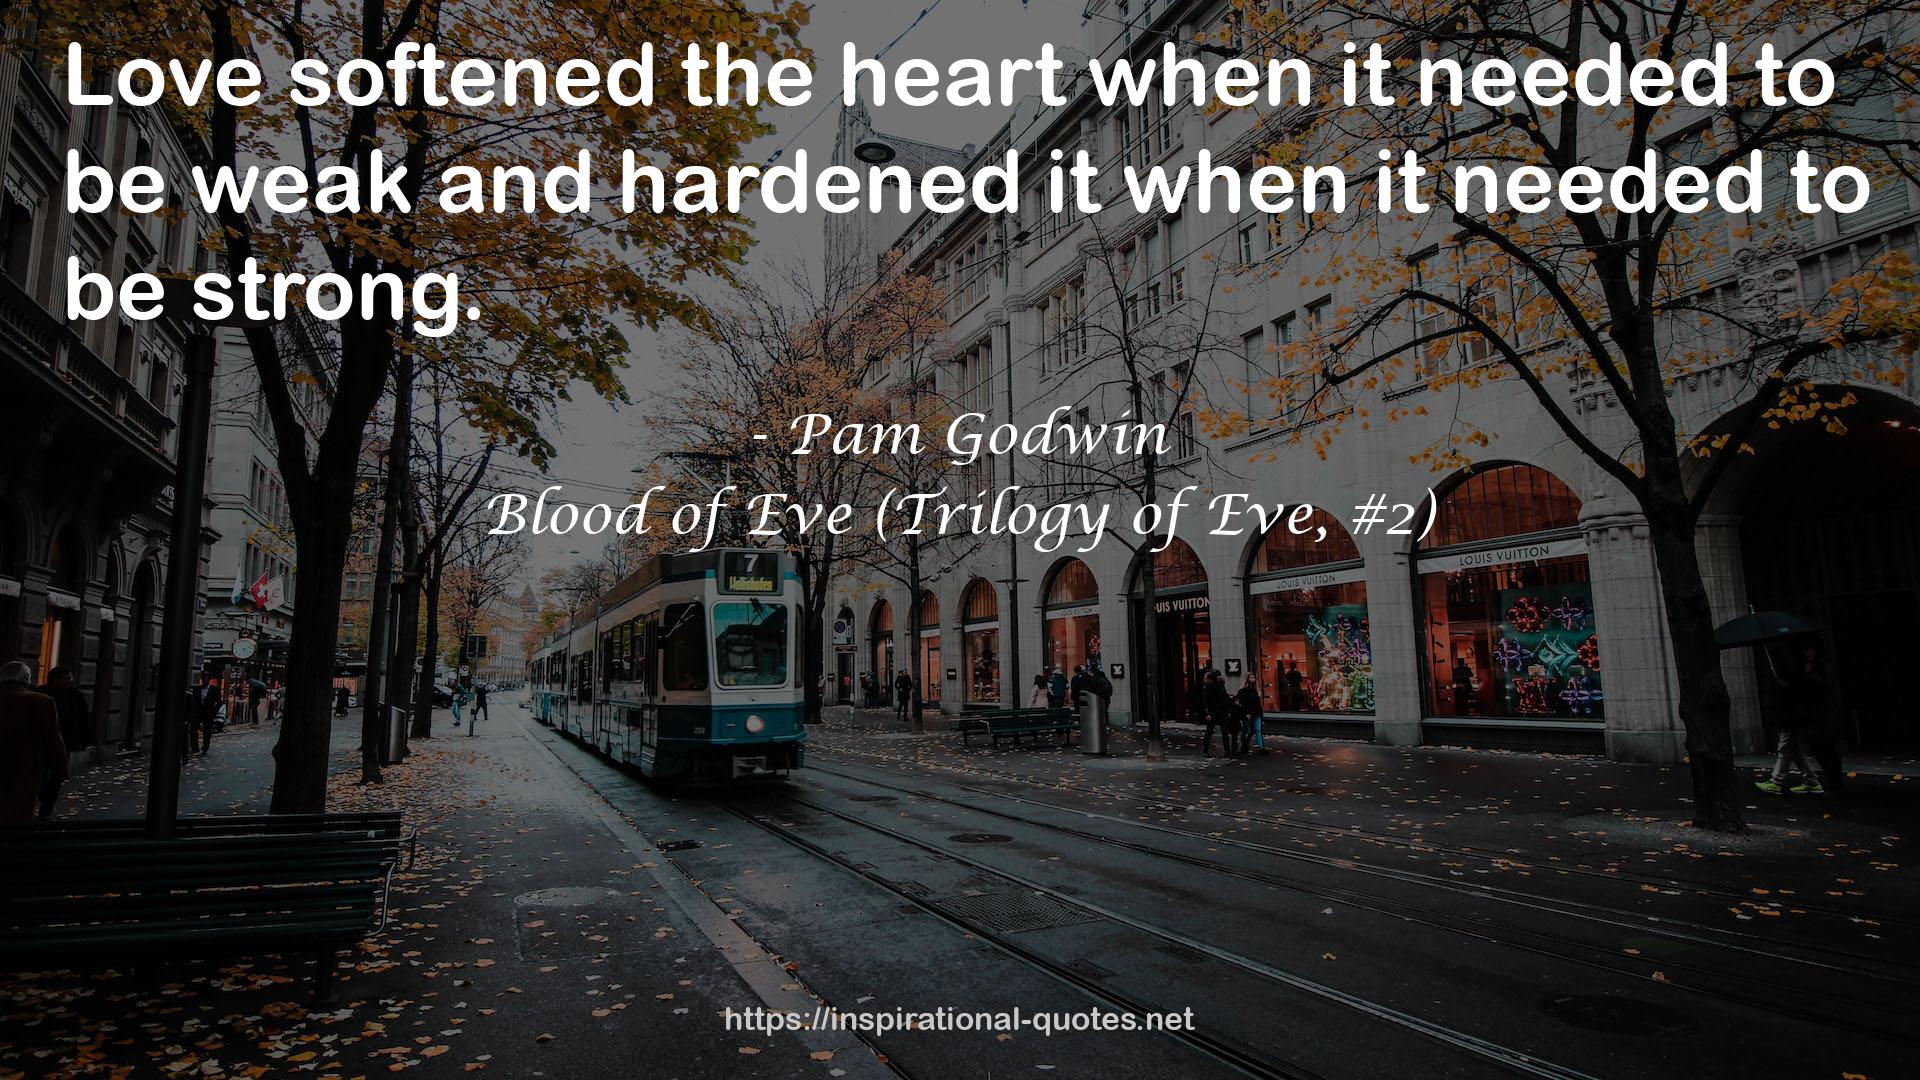 Blood of Eve (Trilogy of Eve, #2) QUOTES